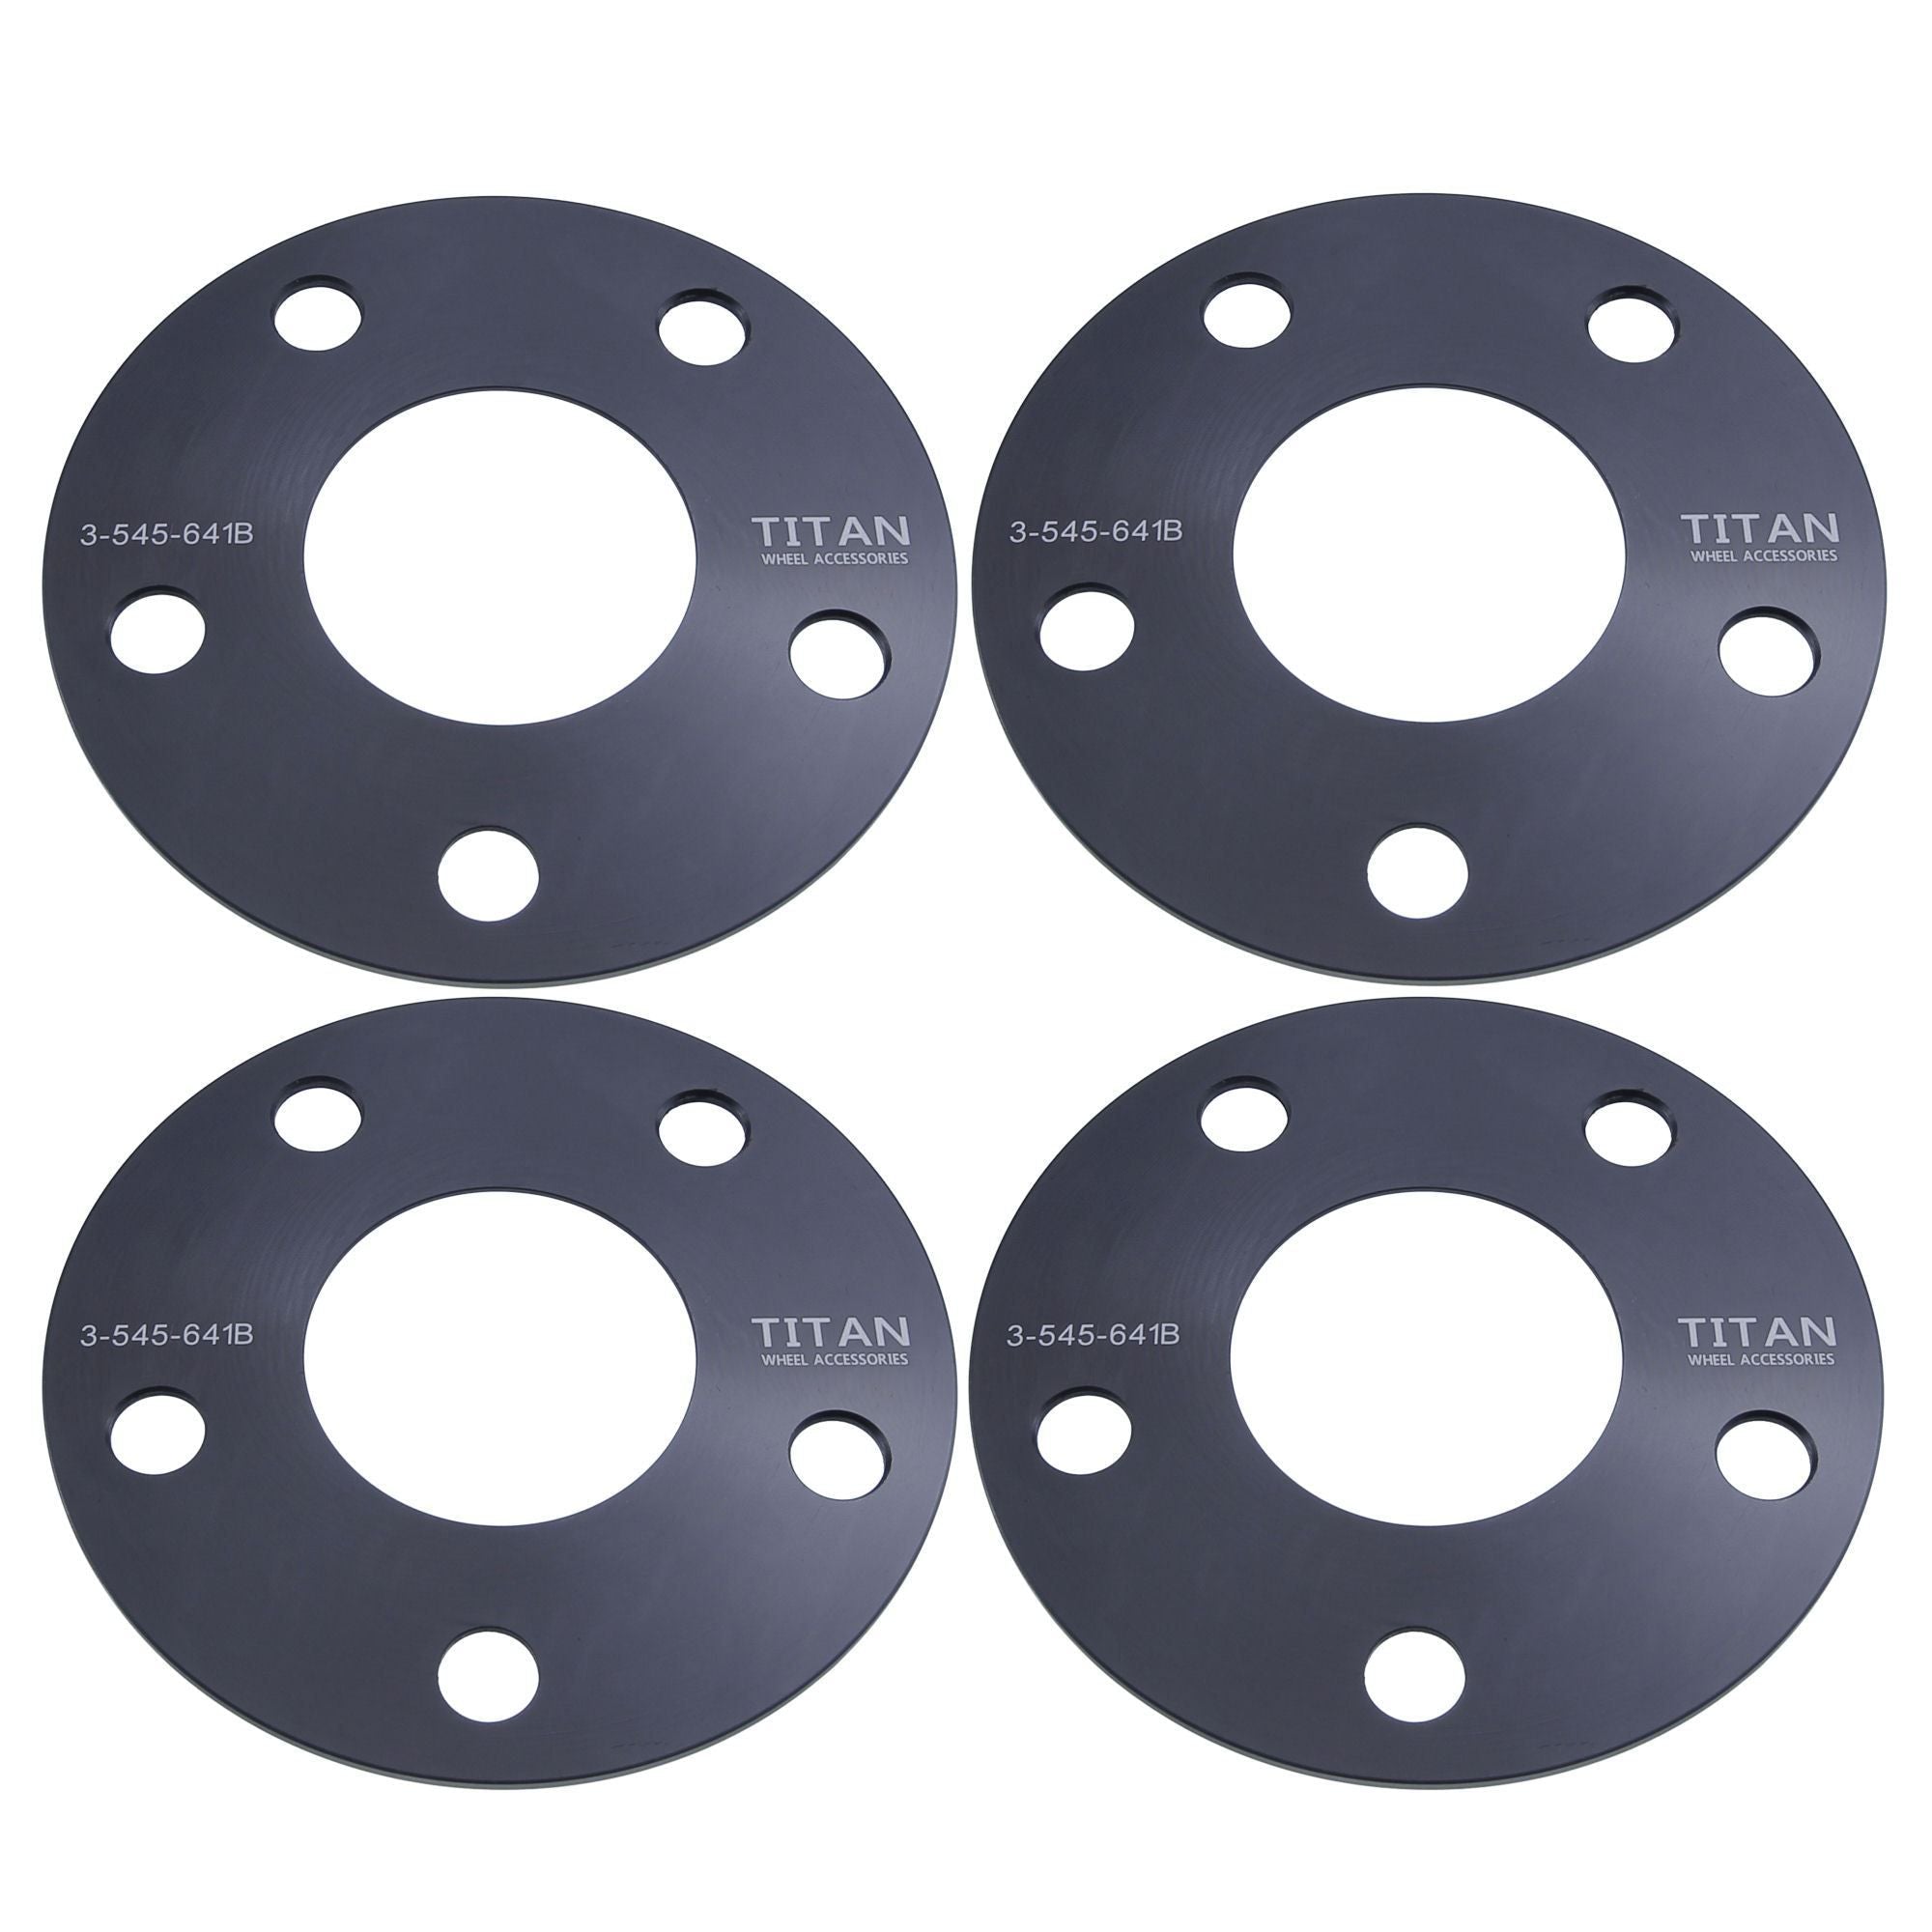 3mm Hubcentric Wheel Spacers for Acura TL Honda Civic Accord